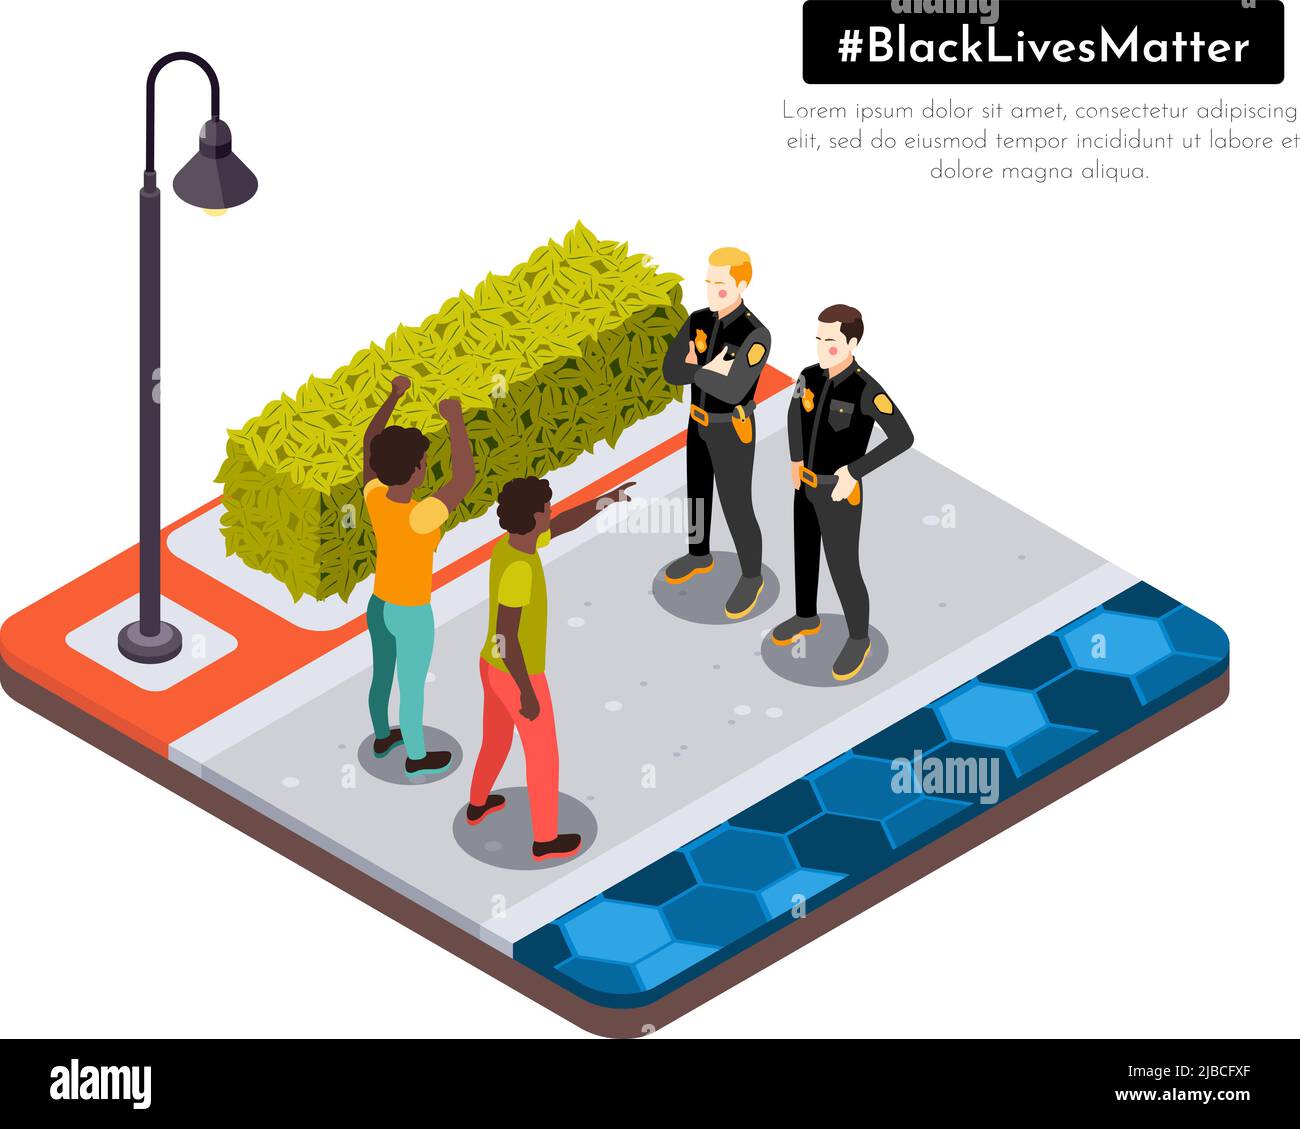 Black lives matter movement racial injustice street protesters confront police isometric background composition vector illustration Stock Vector